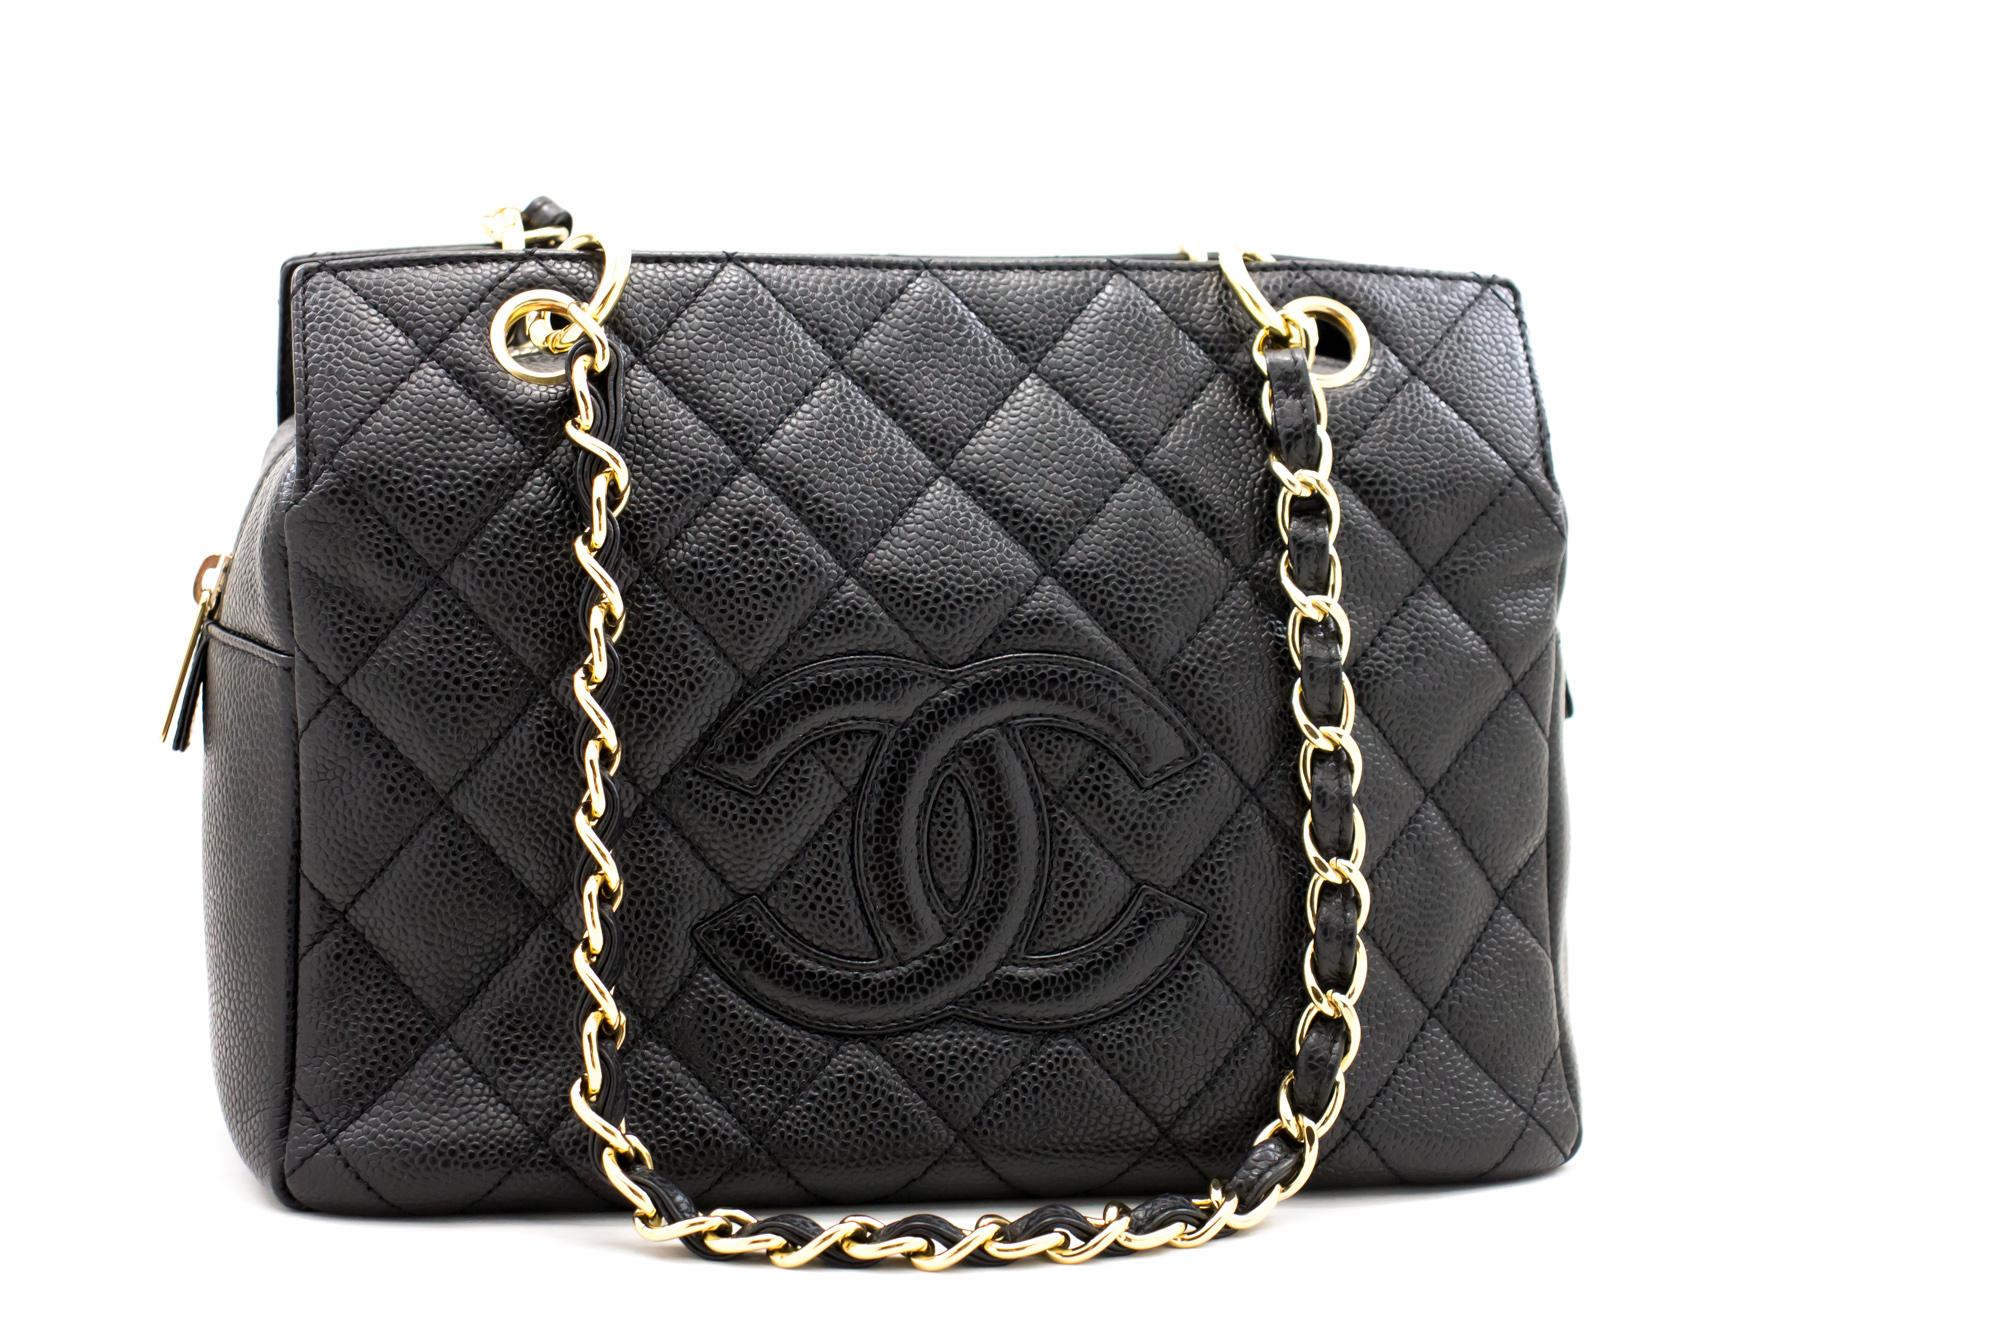 An authentic CHANEL Caviar Chain Shoulder Bag Shopping Tote Black Quilted Purse. The color is Black. The outside material is Leather. The pattern is Solid. This item is Contemporary. The year of manufacture would be 2003.
Conditions &